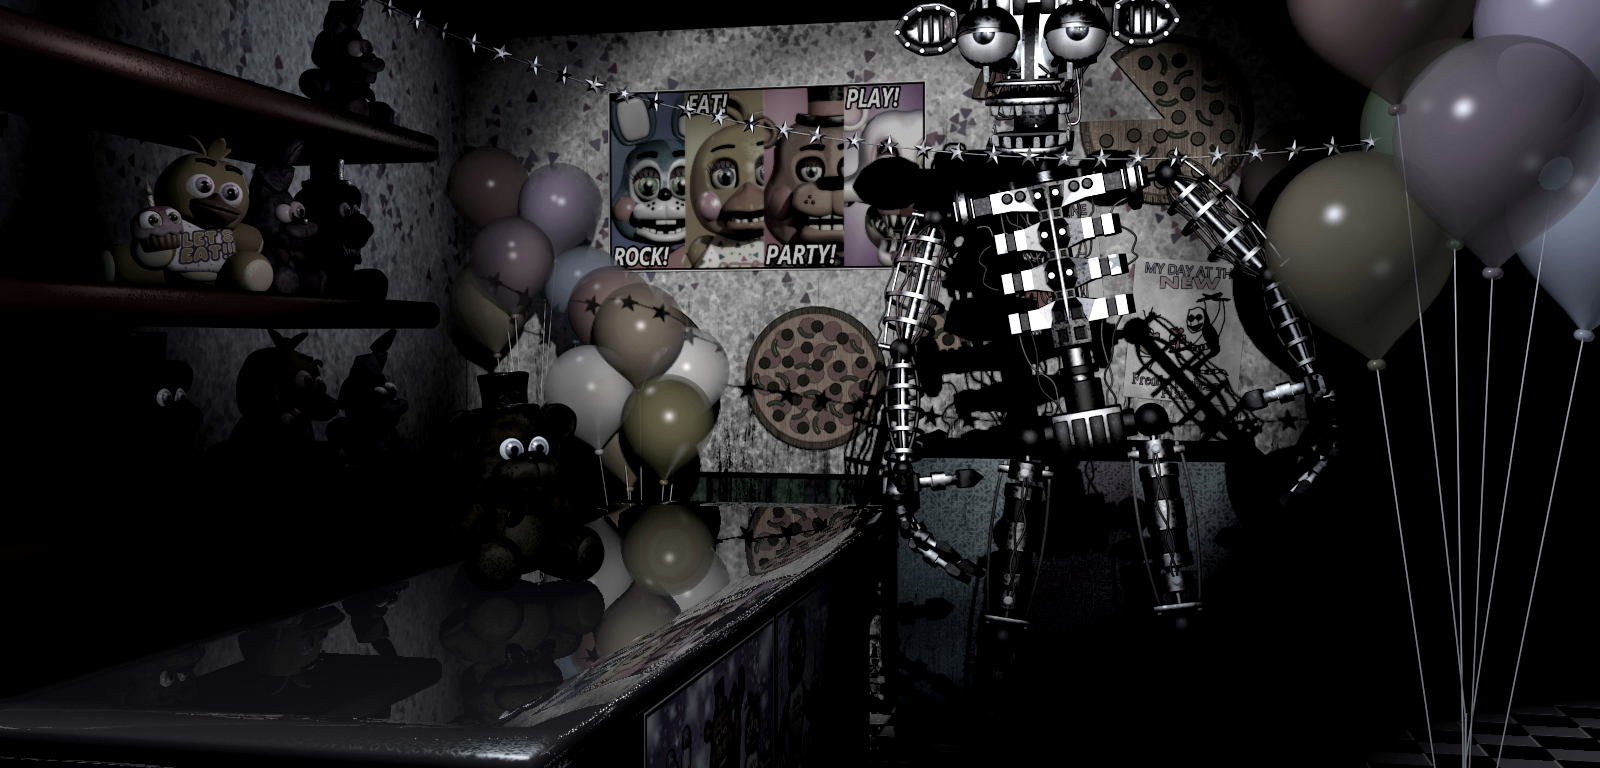 http://img3.wikia.nocookie.net/__cb20141128055456/freddy-fazbears-pizza/images/e/ea/Bare_Endoskeleton_%28clean%29.png